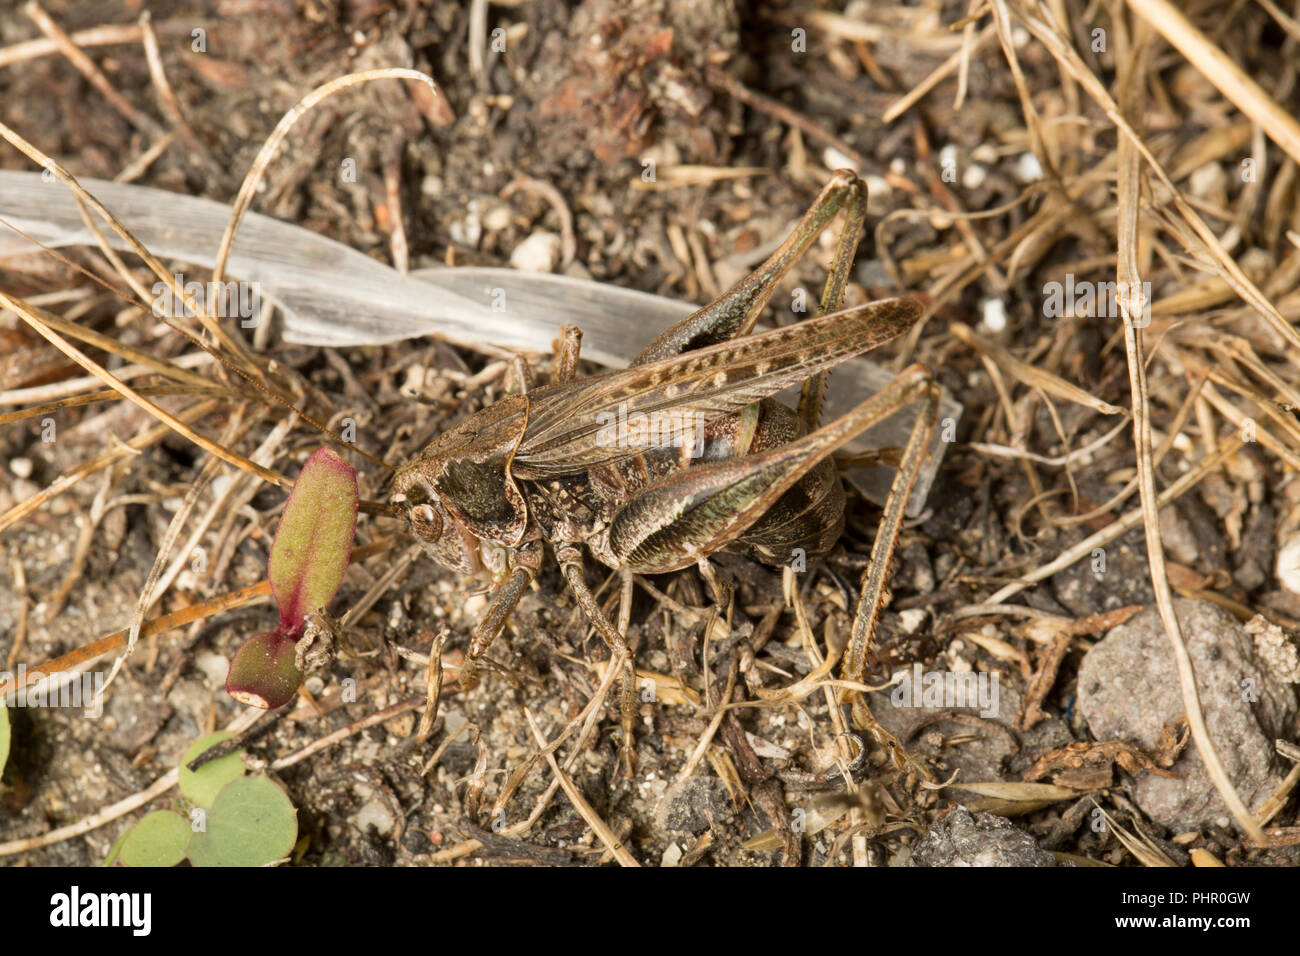 A female grey bush cricket, Platycleis albopunctata, using its ovipositor to lay eggs at night in dry earth patches next to plastic debris alongside a Stock Photo